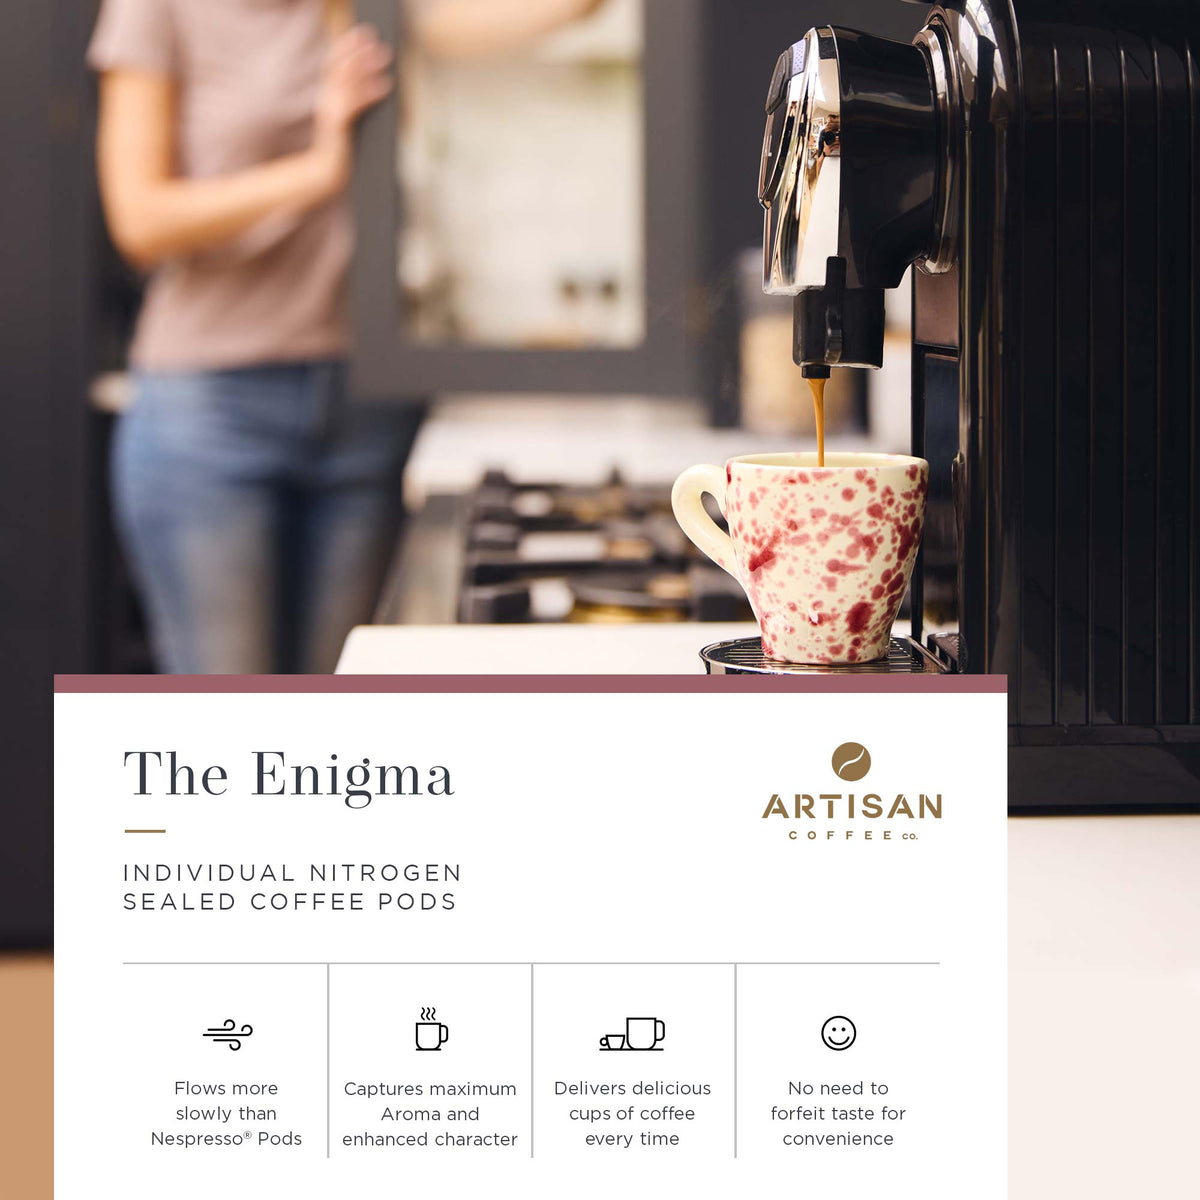 Artisan Coffee Co The Enigma Pods Infographic Nitrogen Sealed